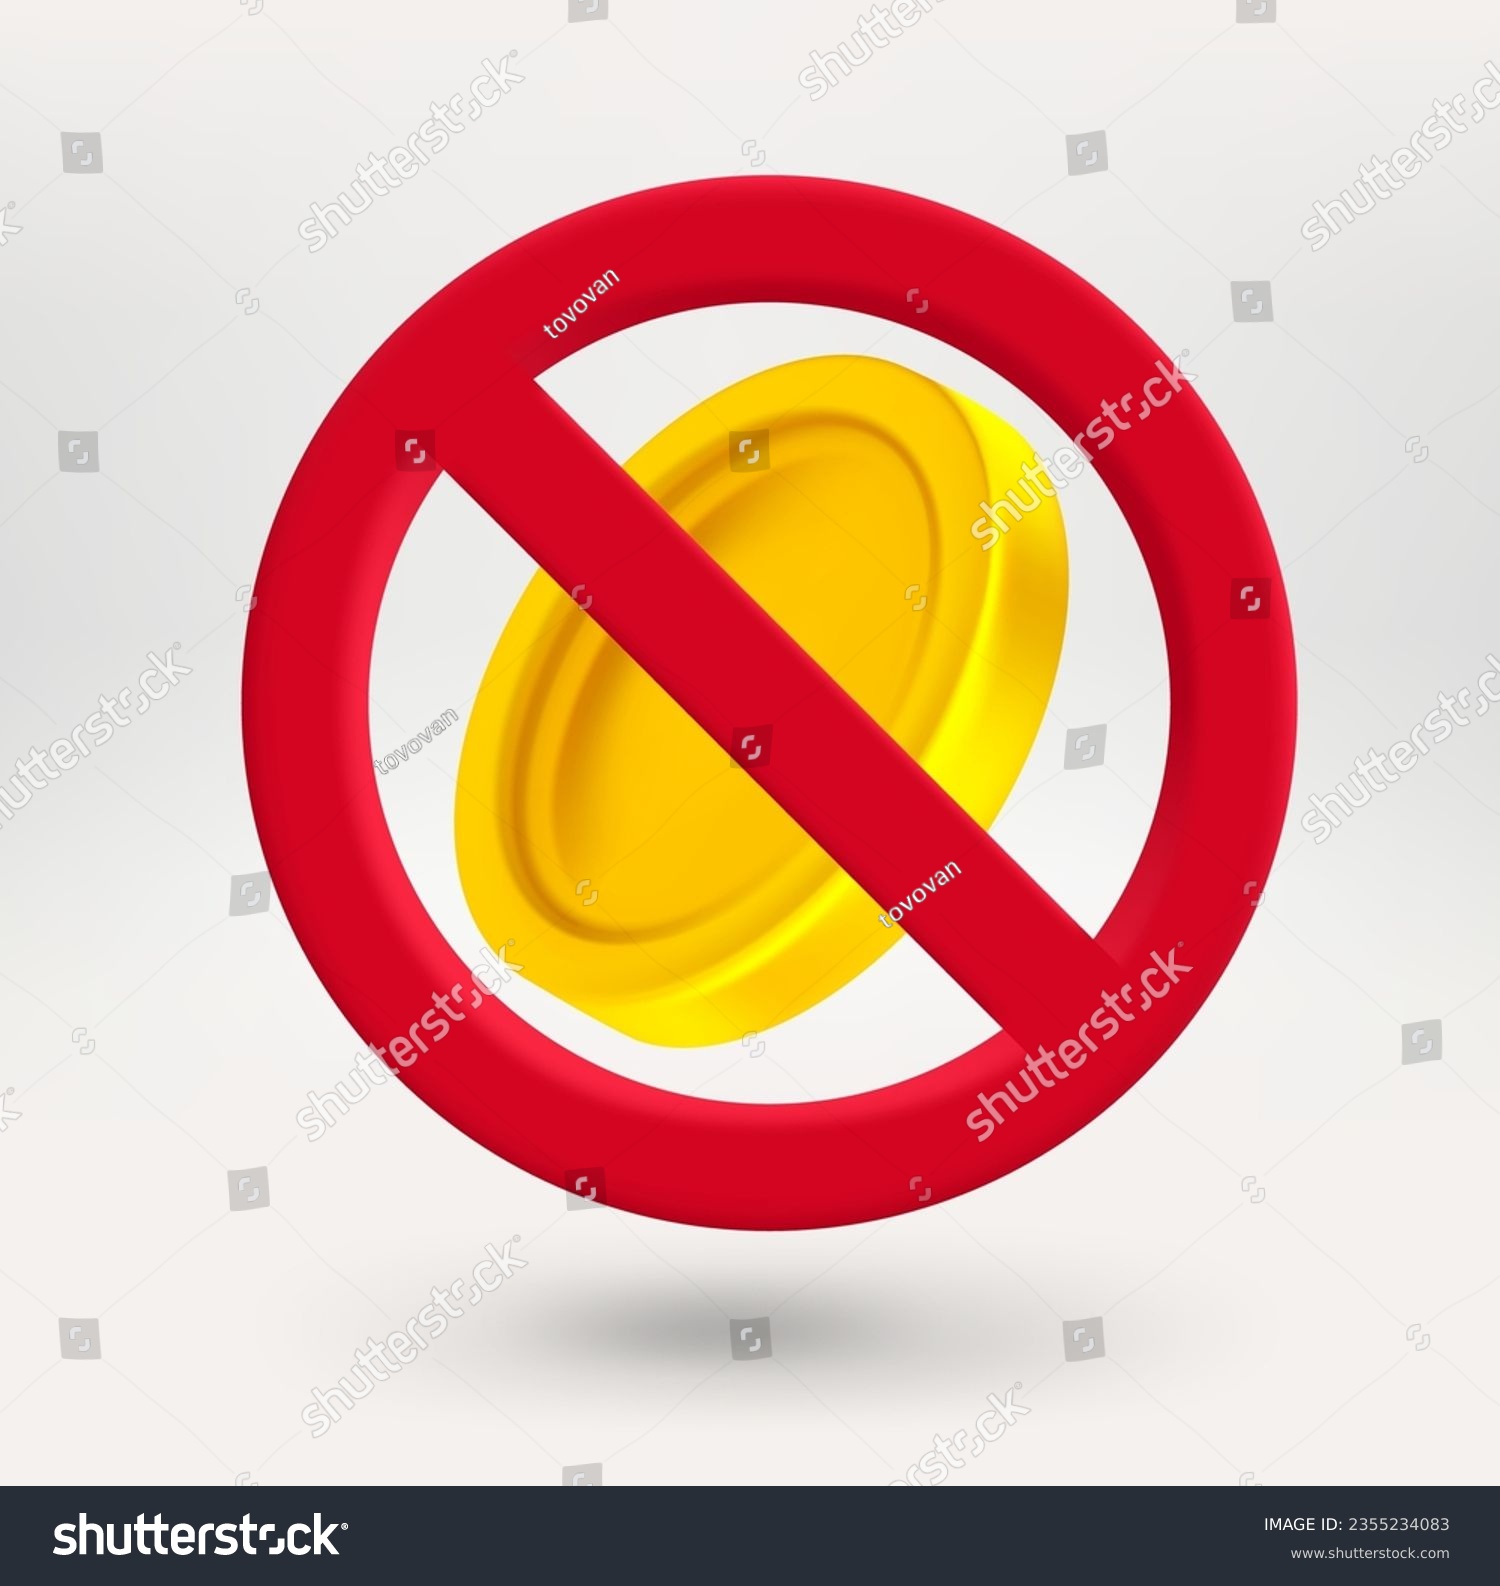 SVG of Golden coin in red circle with crossed line. 3d vector icon 
 svg